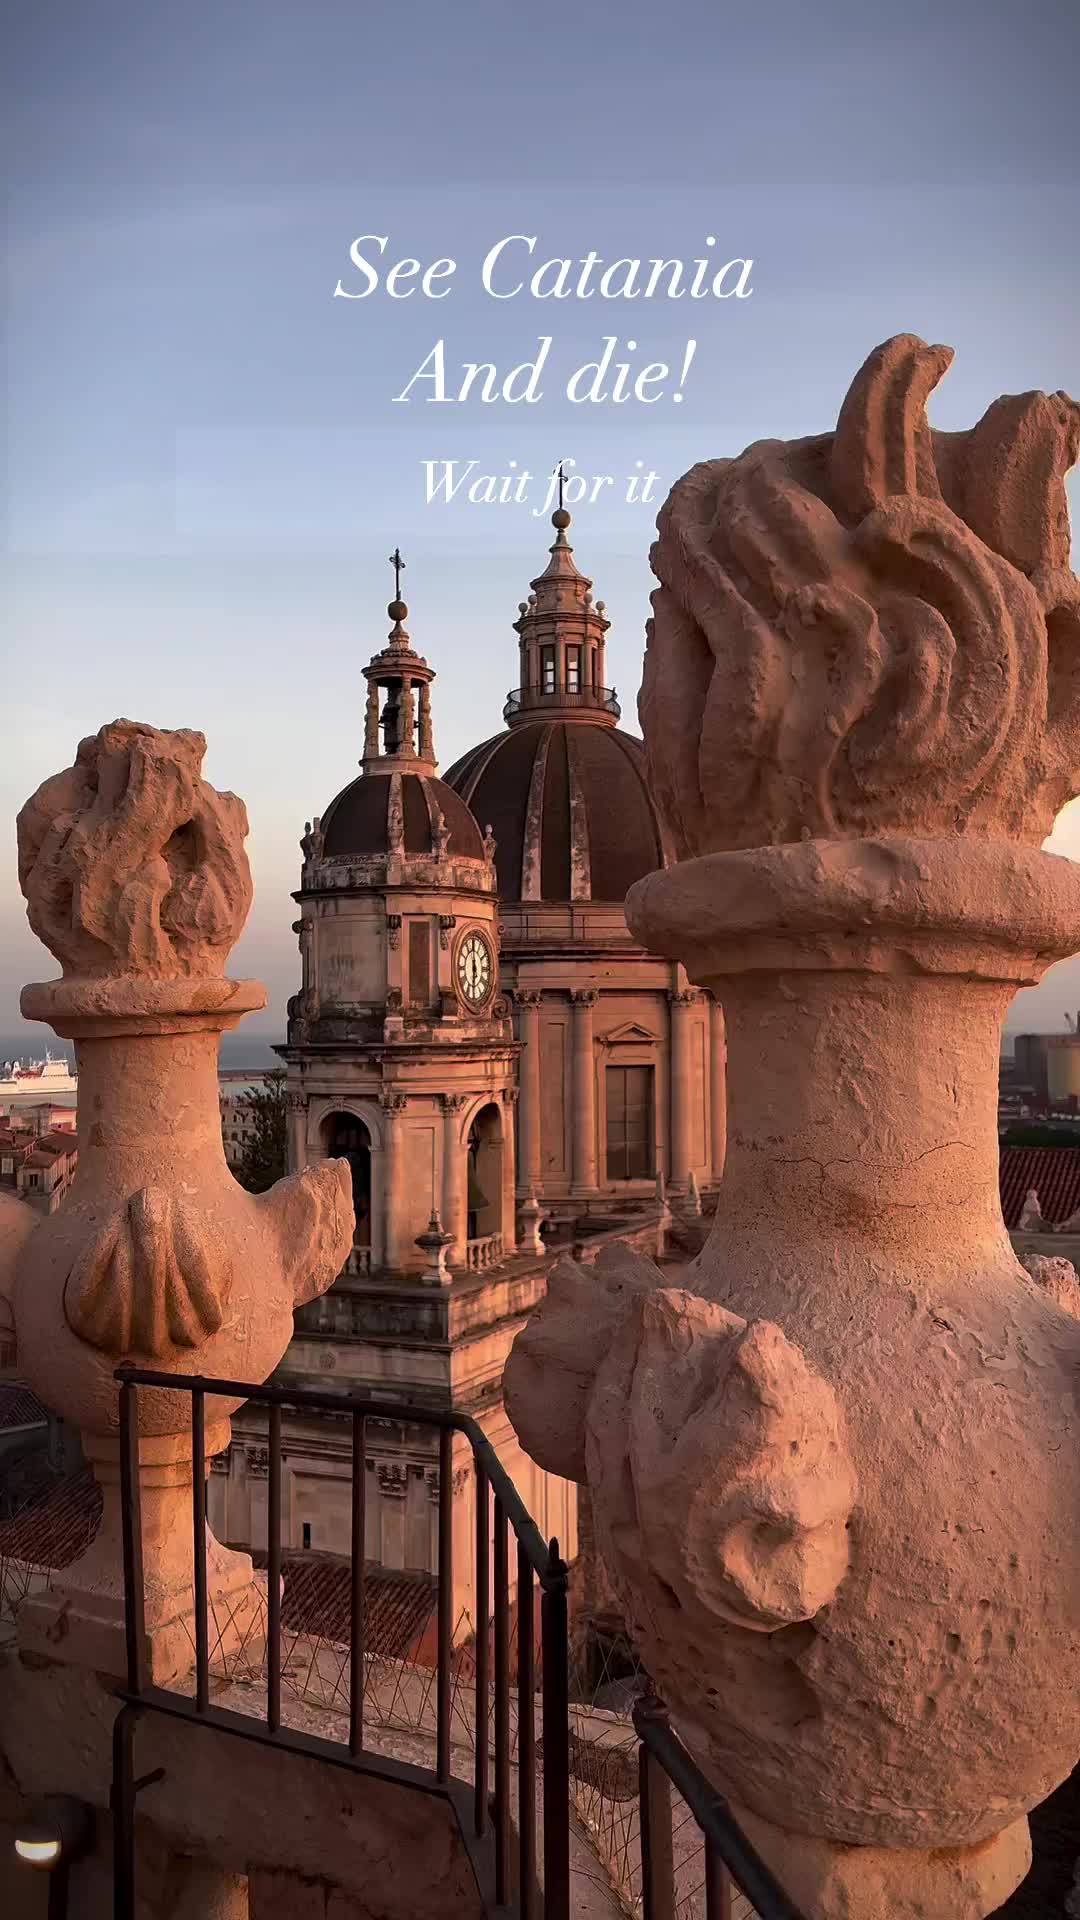 🤩 🌋 see Catania and die! 😳Wait for it! 
👇🏻 find my favorite spots below! 
📍if you wanna experience Sicily as it is, go to Catania. It’s very honest and less touristic. 
🏛️ you will find amazing untouched baroque buildings which talk about the aesthetical soul of this city.
🌋 the Etna is a permanent threat for the city and you can feel this special situation.
😇 here you can learn how to deal with threats in beauty. 

🏛️ Chiesa Sant Agata
🏛️ palazzo Biscari
🌳 garden of Villa Bellini 
⛲️ Fontana Dell Amenano
🌳 garden of Villa Cerami
🏛️ Chiesa San Benedetto
🏛️ Via Crociferi 

#baroqueblockbuster #baroque #Sicily #visiteurope #etna #catania #visitsicily #visitcatania